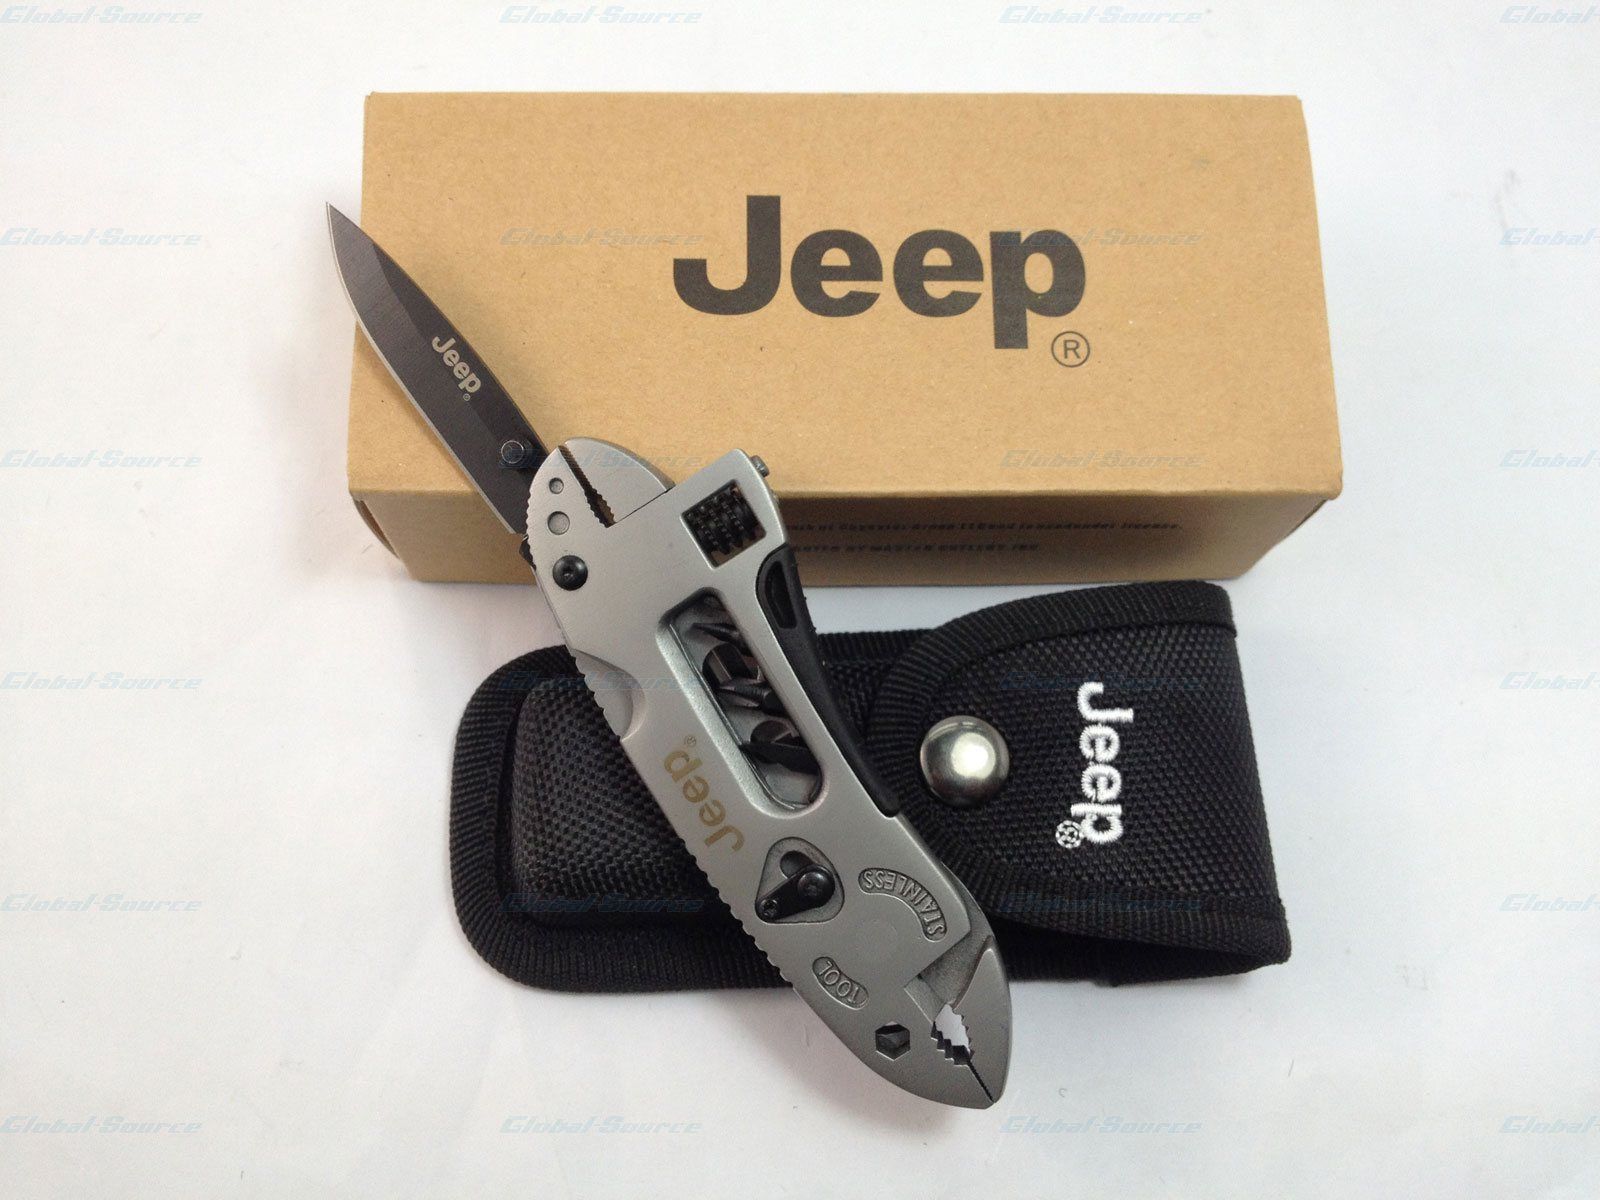 Jeep Multi-Tool Adjustable Wrench Jaw Screwdriver Plier Knife Survival Gear +Box